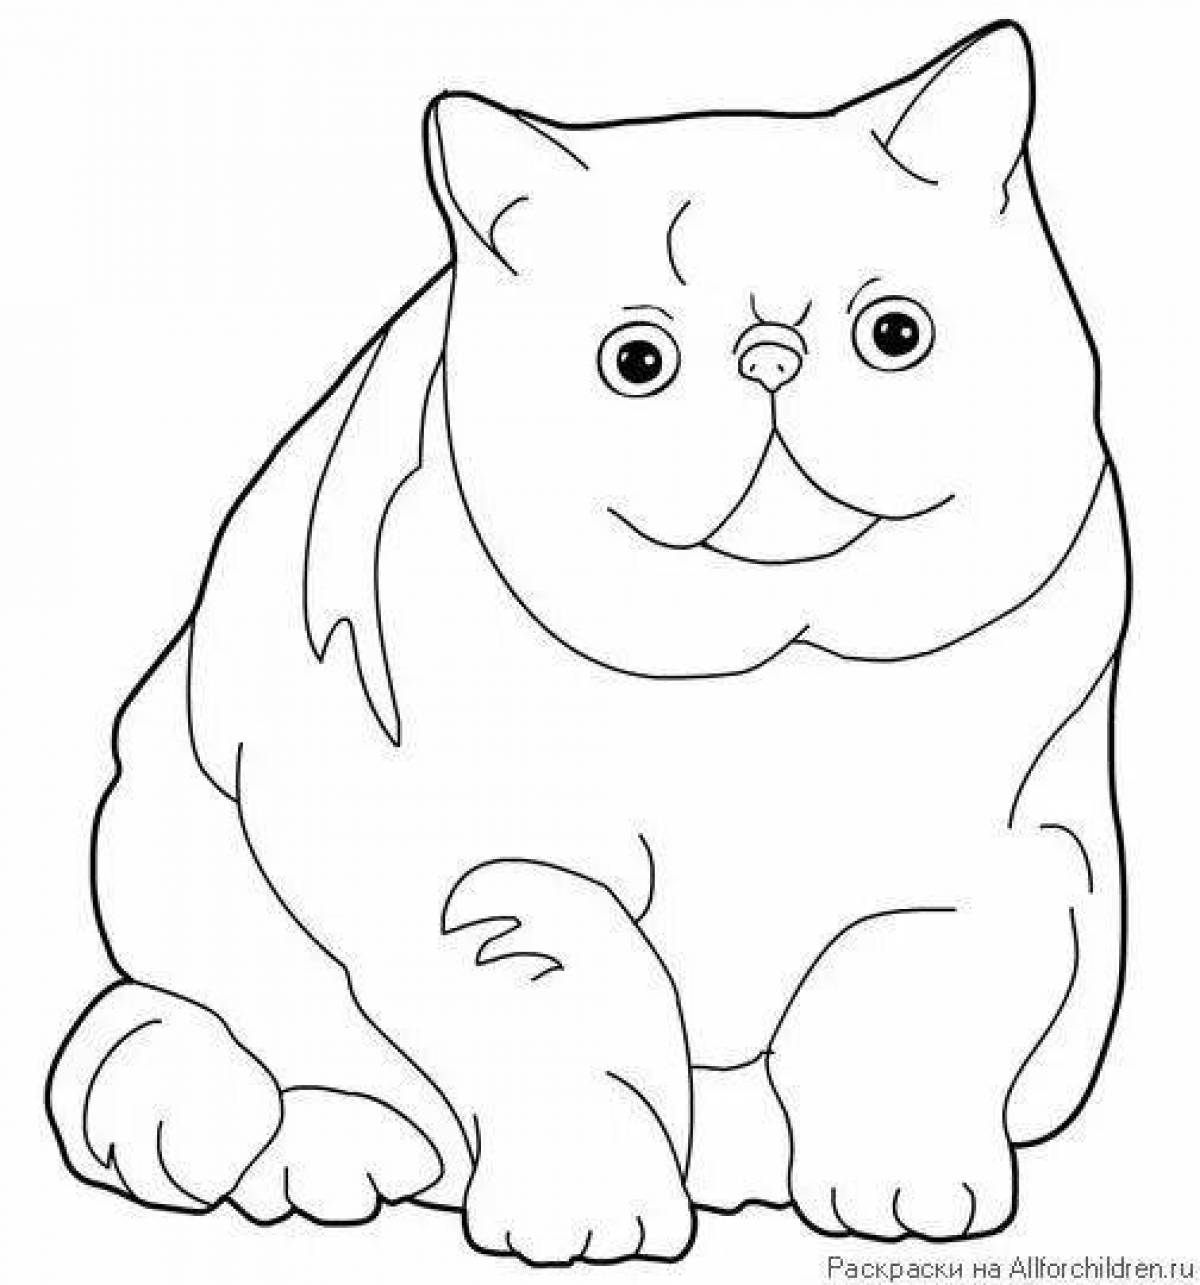 Adorable fold cat coloring page